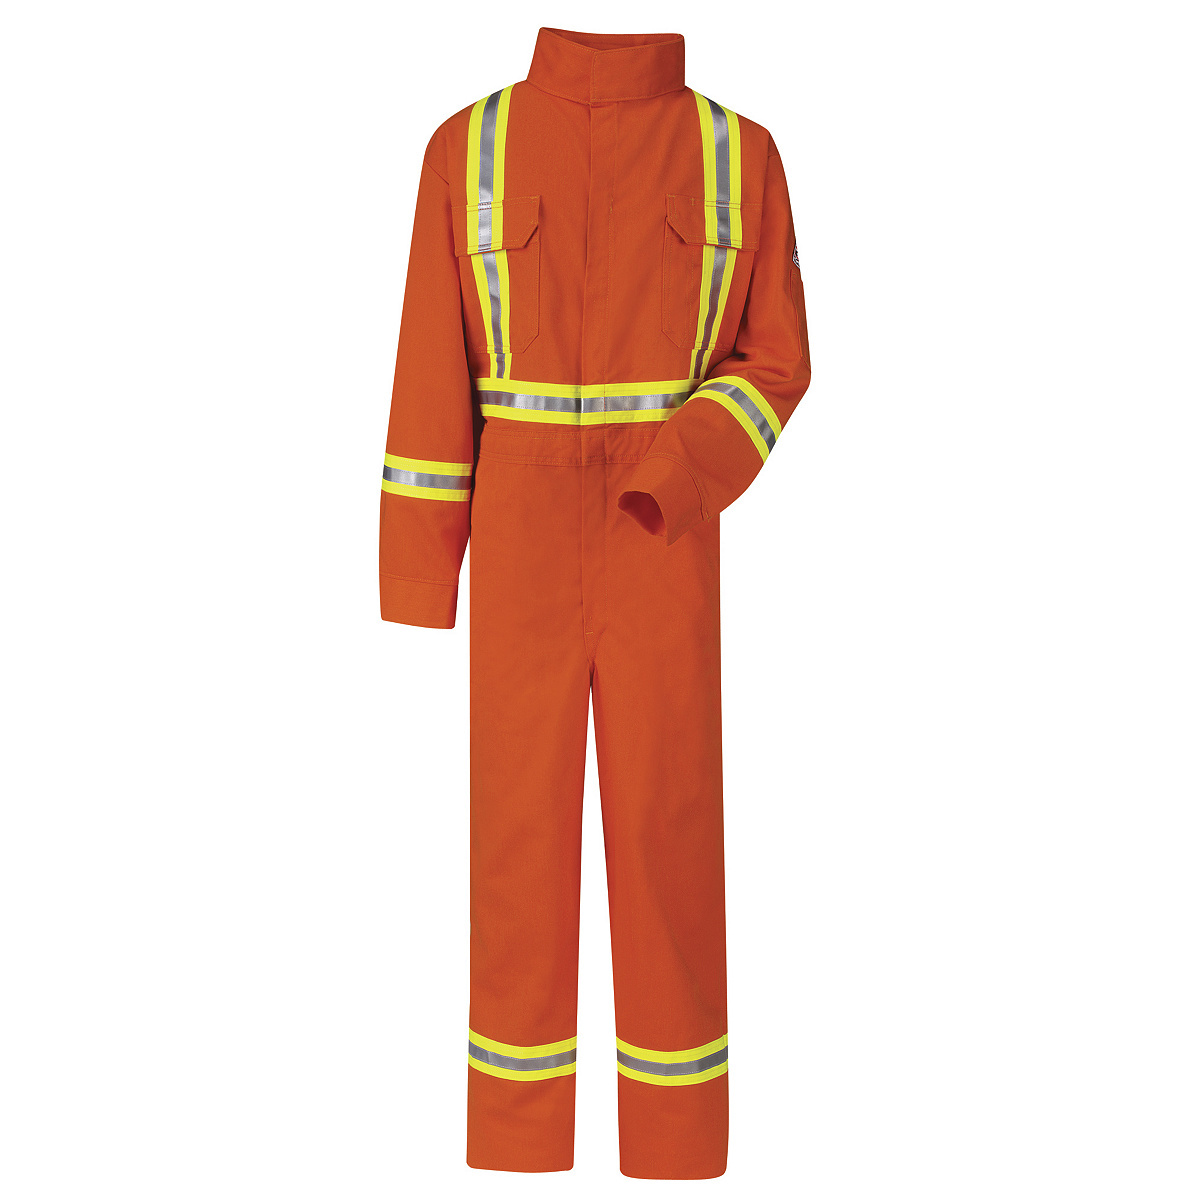 Bulwark® 52 Regular Orange Westex Ultrasoft® Twill/Cotton/Nylon Flame Resistant Coveralls With Zipper Front Closure And Reflecti